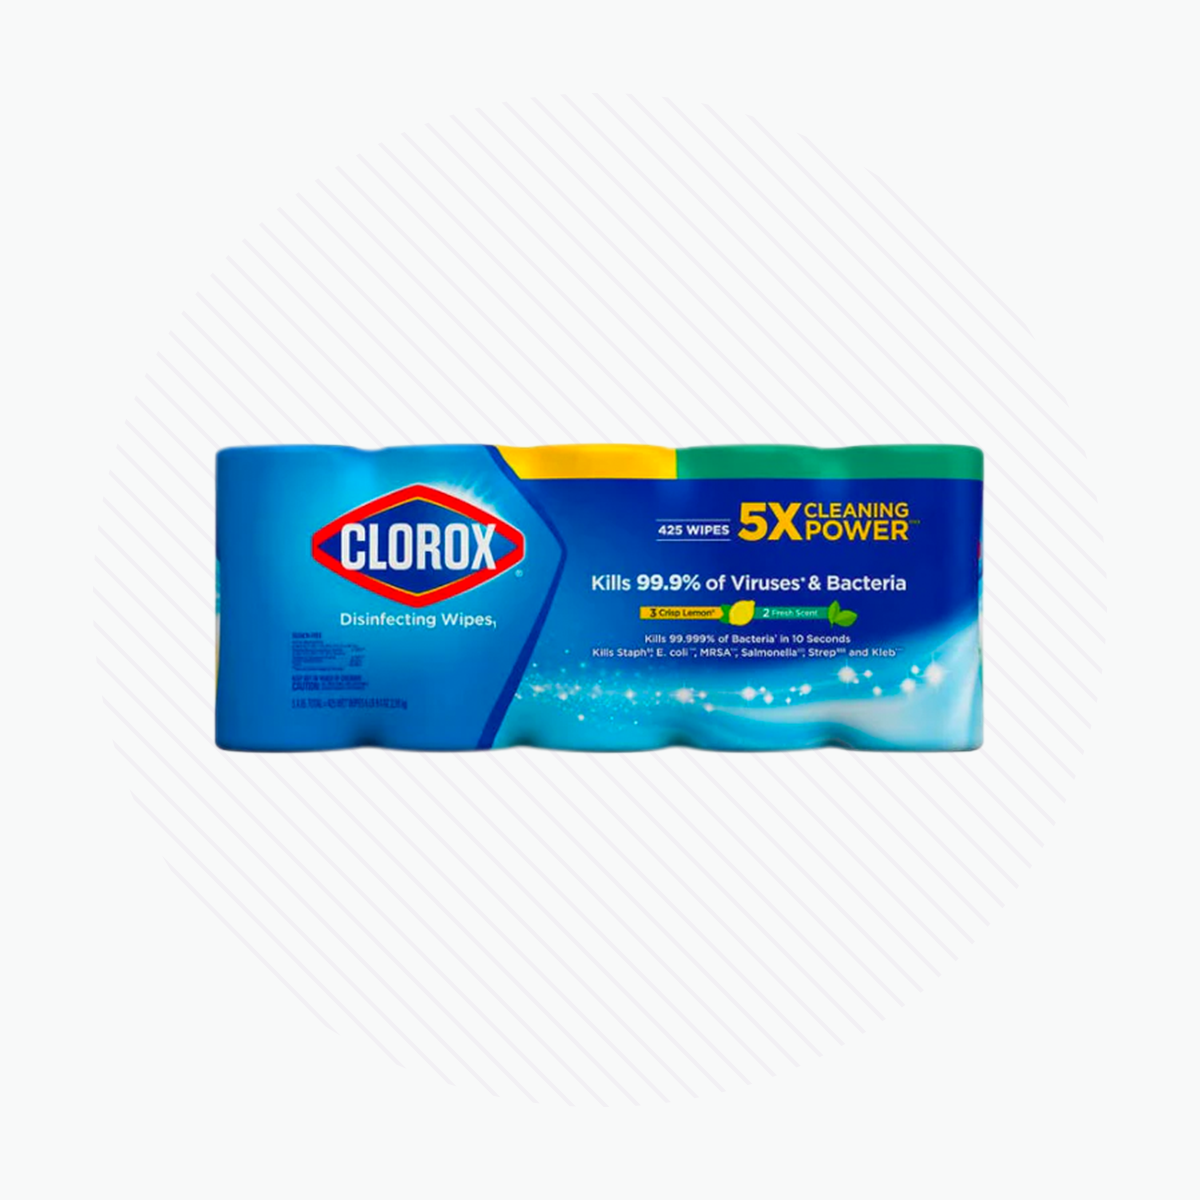 Clorox Wipes, Disinfecting, Orange Fusion, Cleaning Wipes